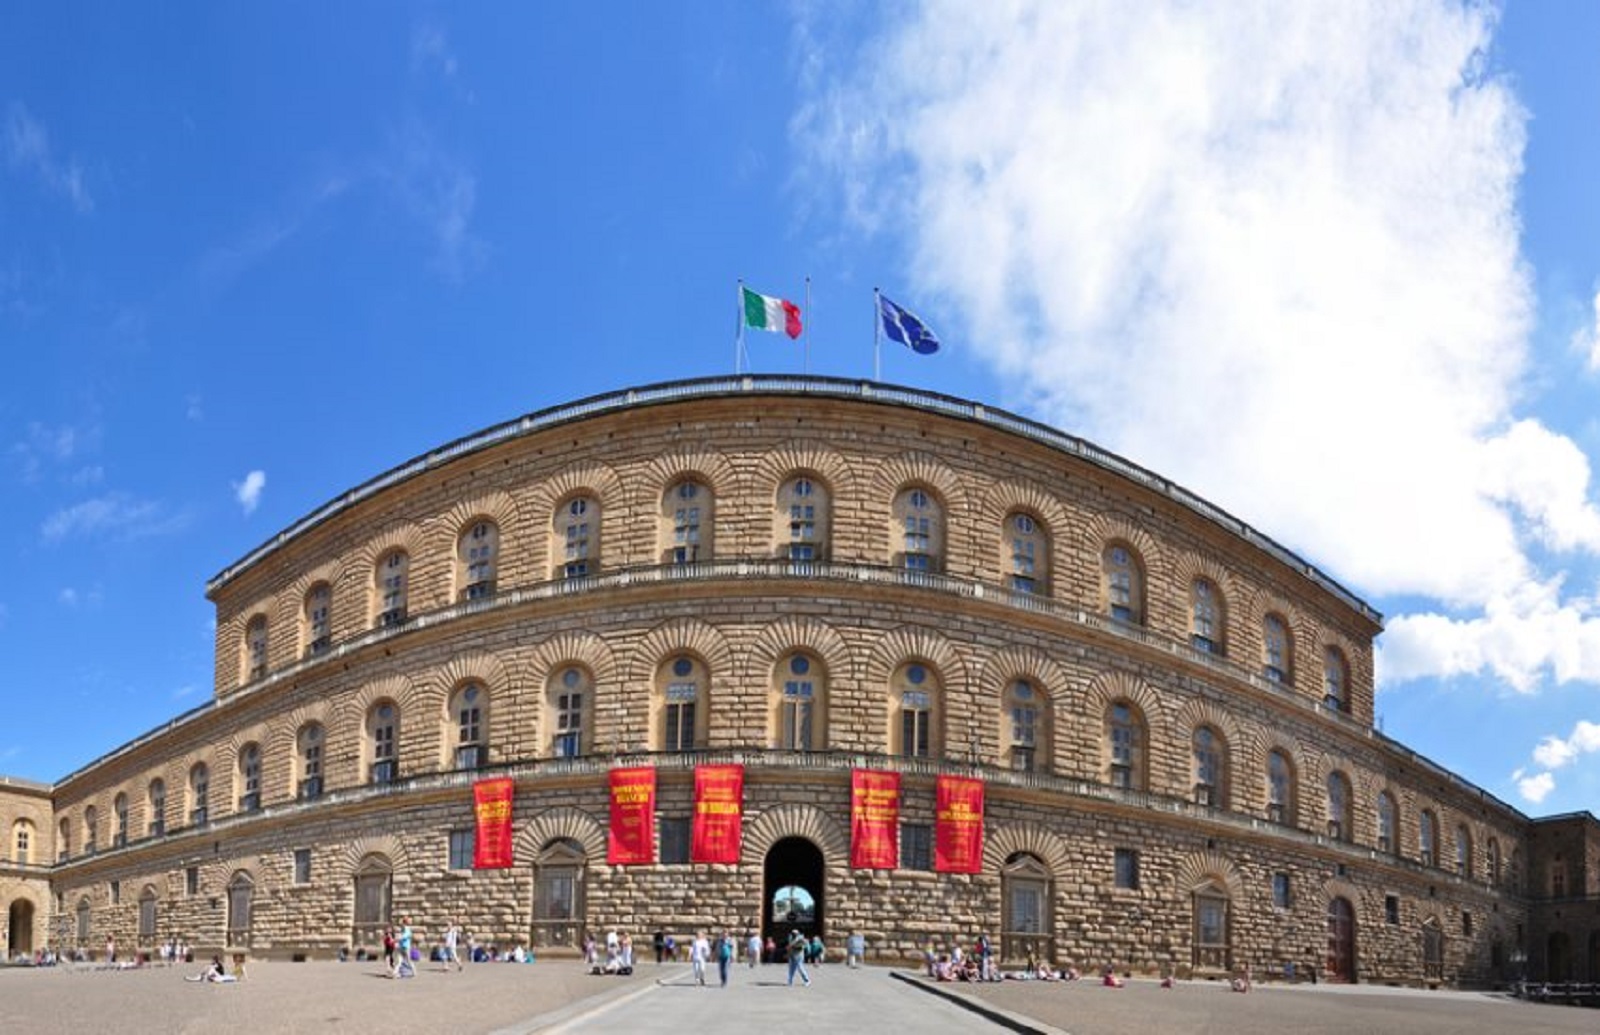 Guided tour of Palazzo Pitti and Galleria Palatina in Florence